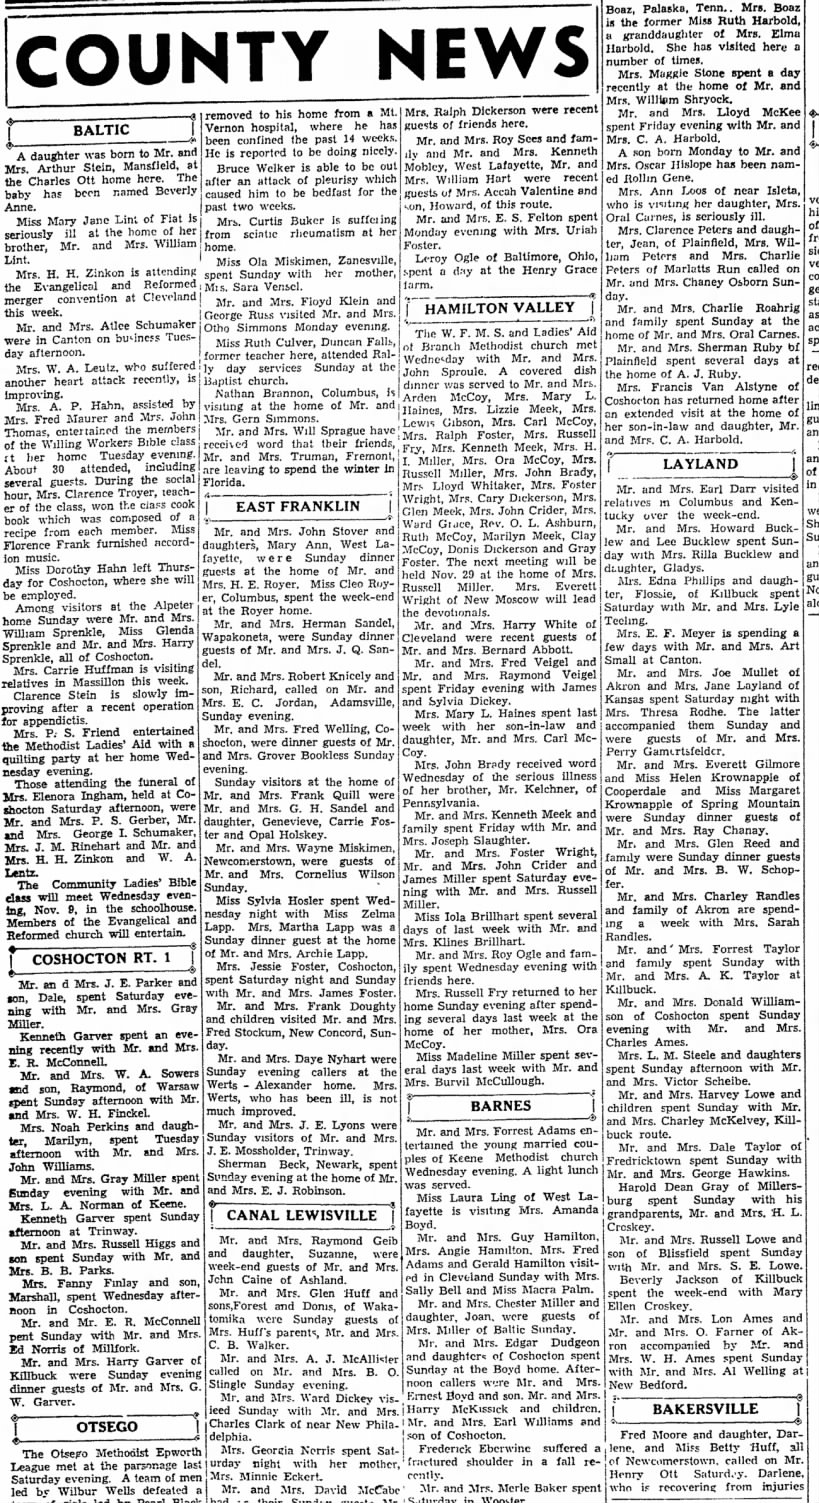 Small-town news around the county. 1939 Ohio.